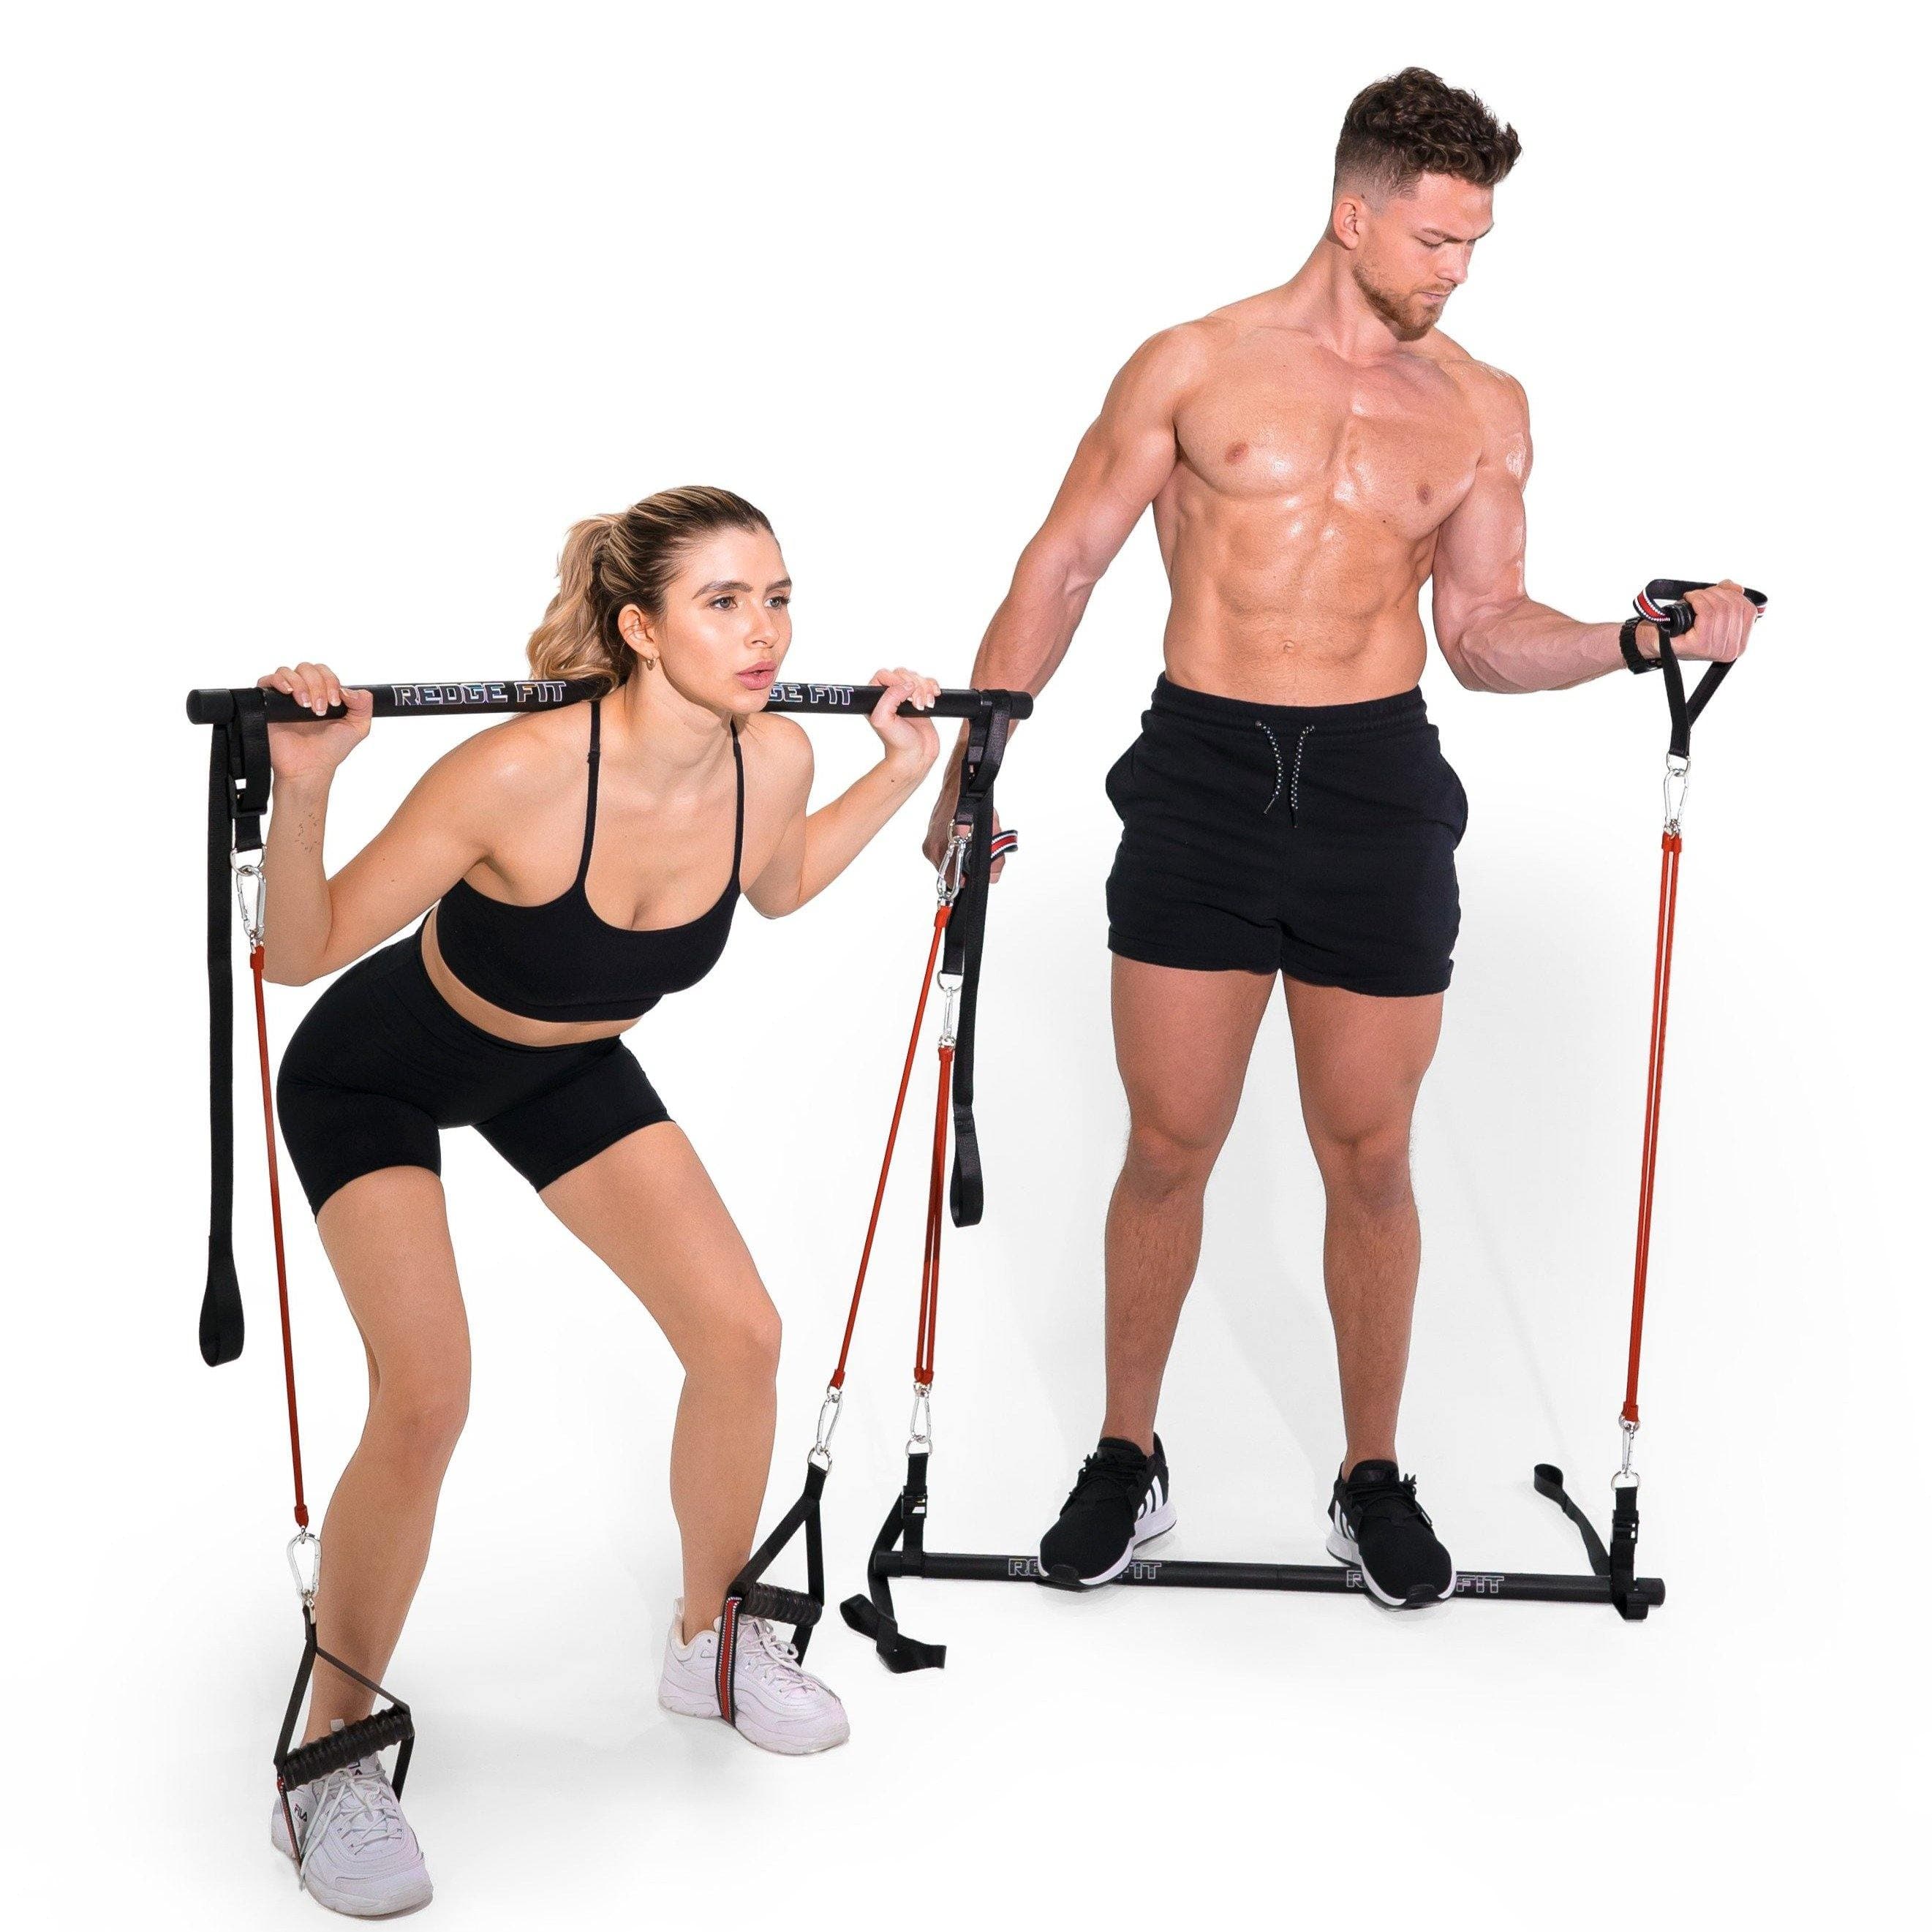 Man and Woman modeling the Redge Fit Core Focus Pro Portable Gym Machine Available at https://www.getredge.com/products/core-pro-pack